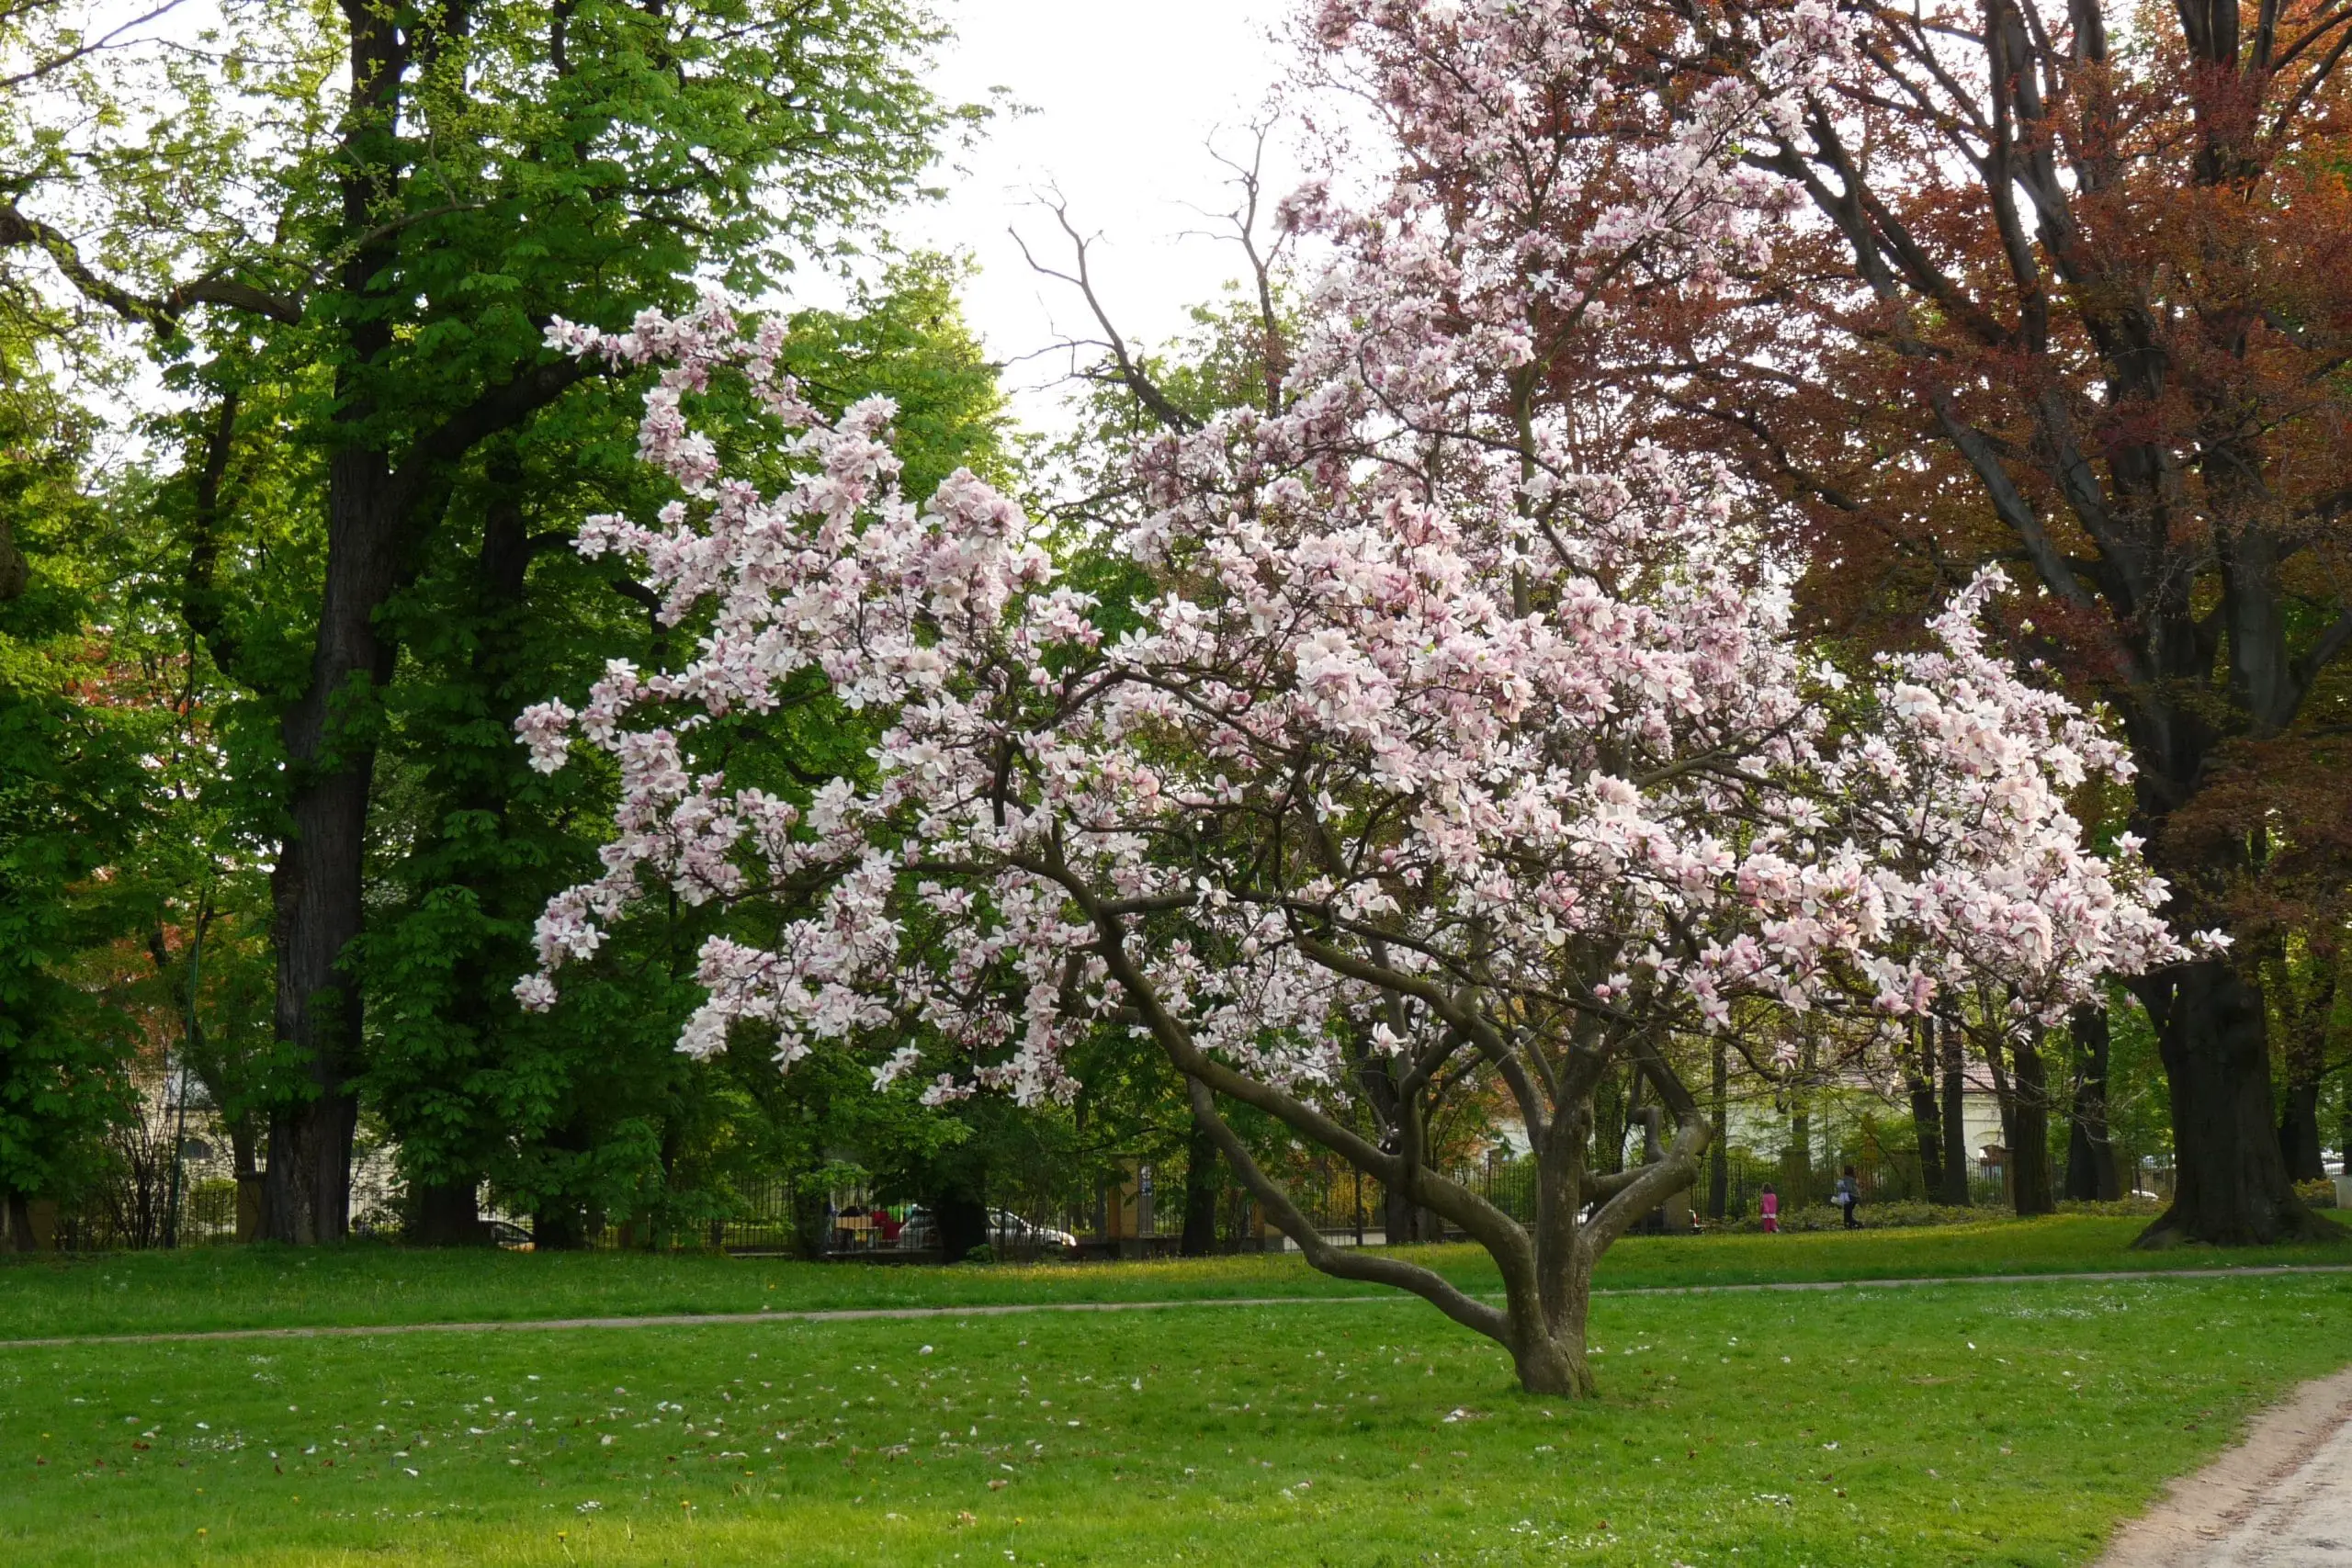 Main varieties of Magnolias and their care